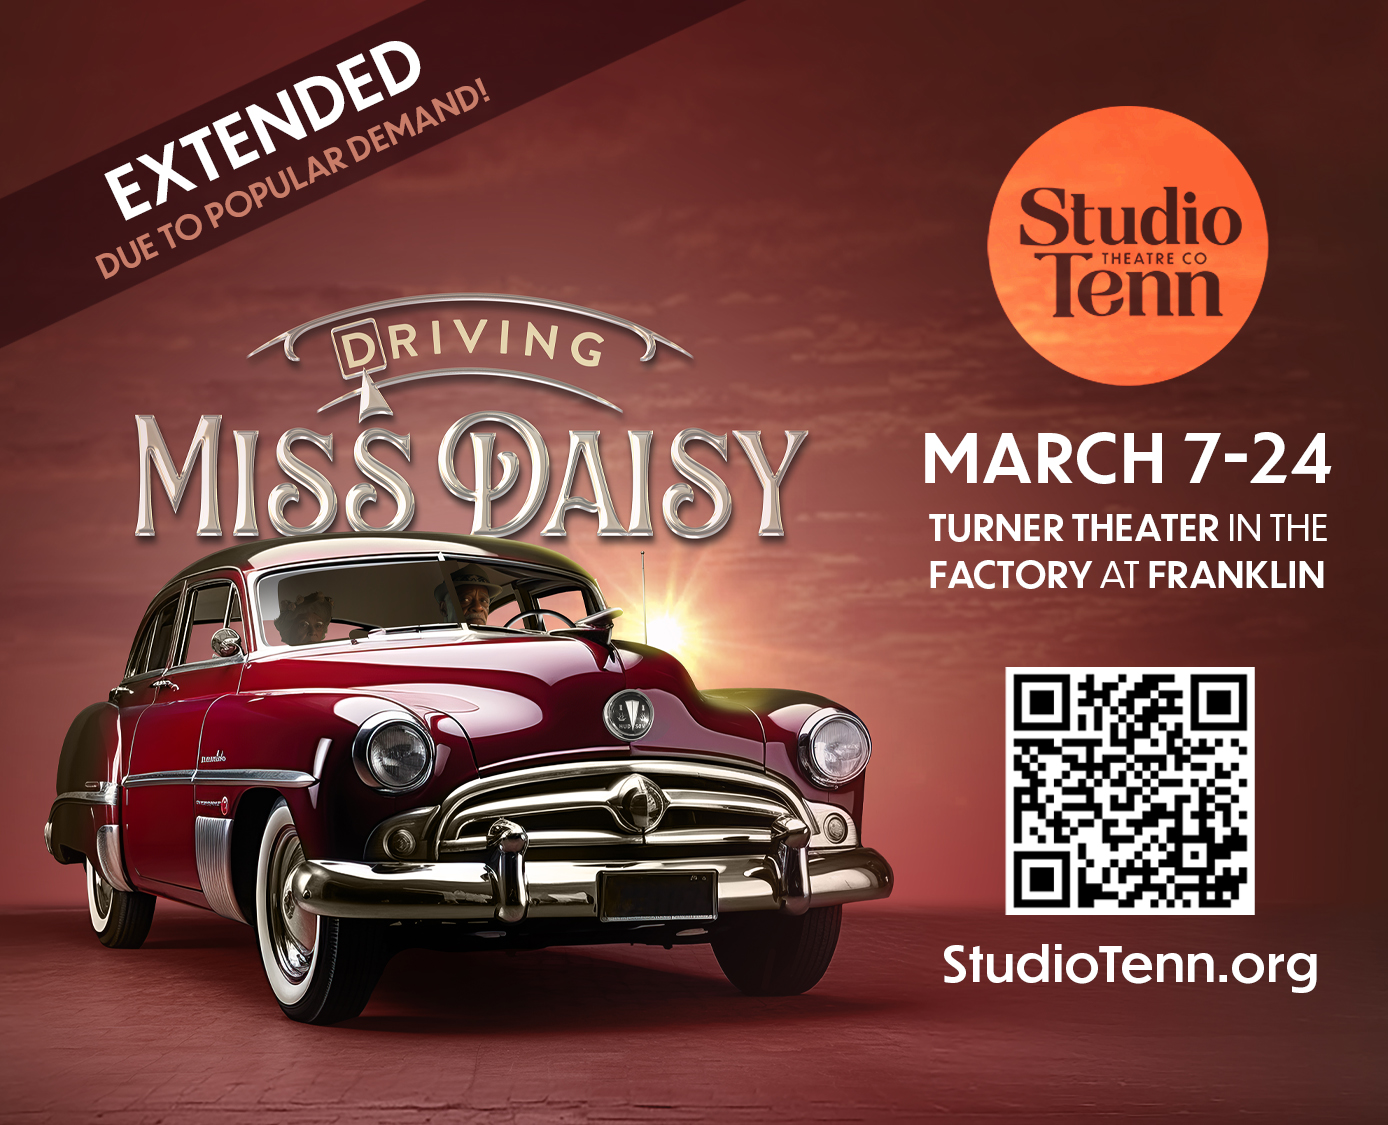 Driving Miss Daisy_The Factory at Franklin Turner Theater_Studio Tenn.